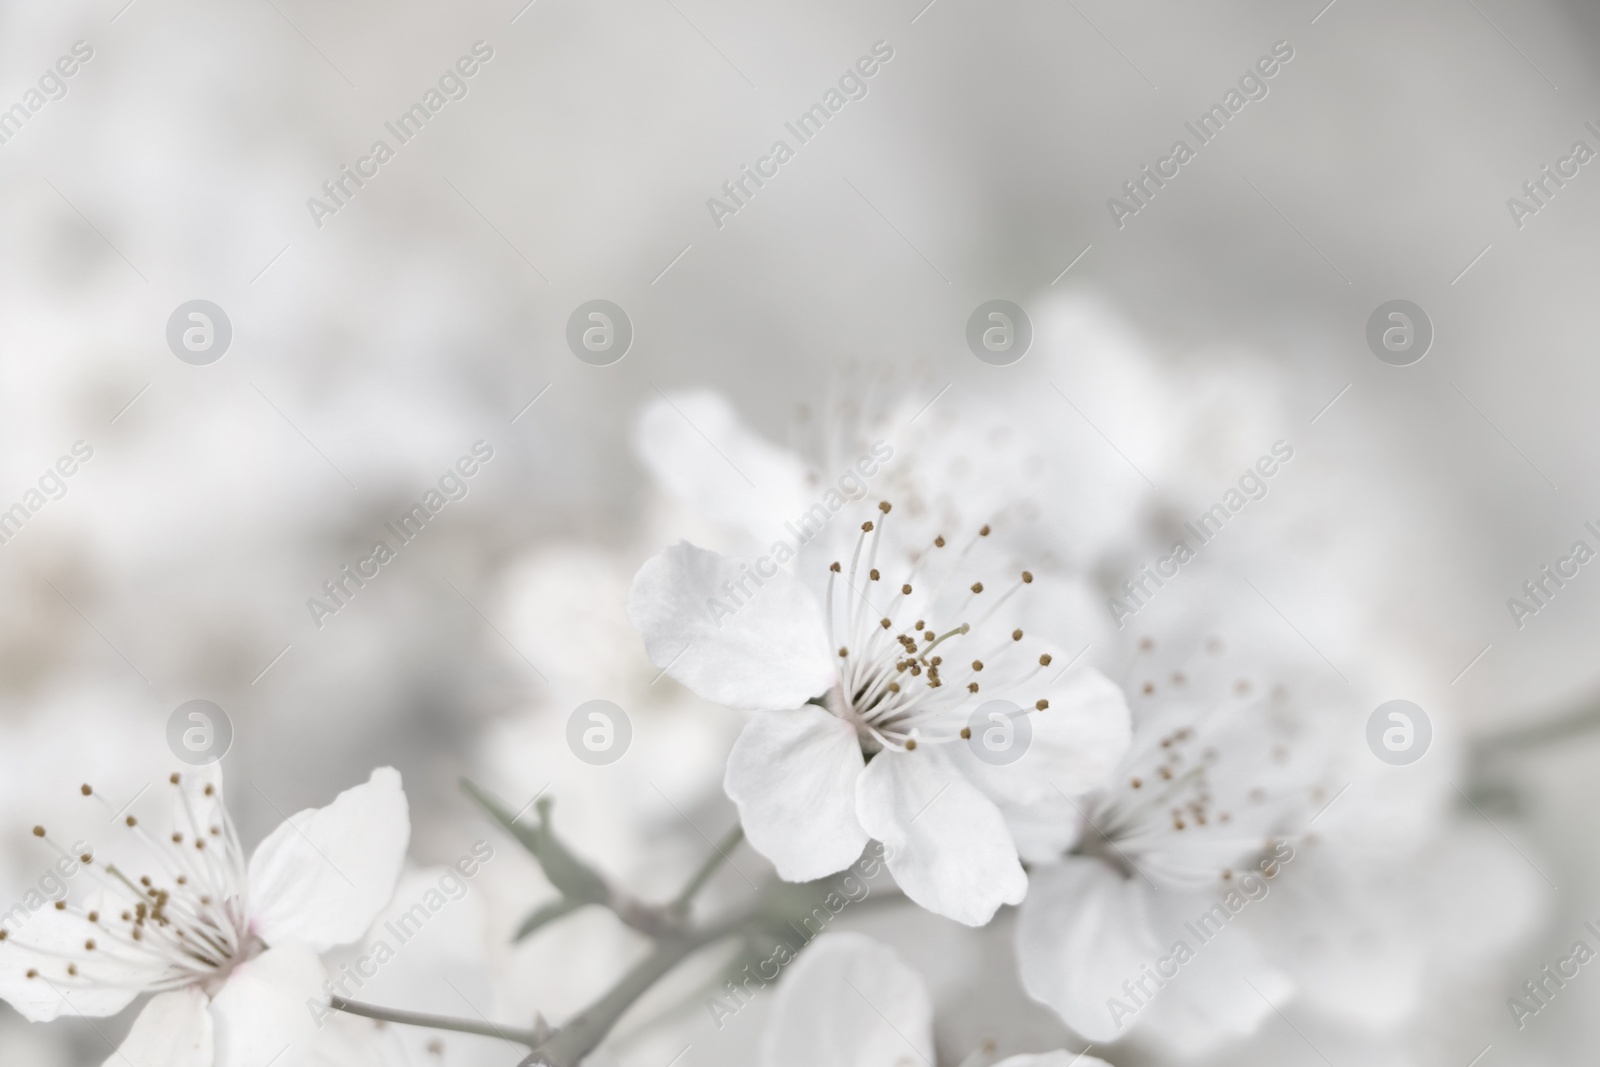 Image of Cherry tree with white blossoms on blurred background, closeup. Spring season